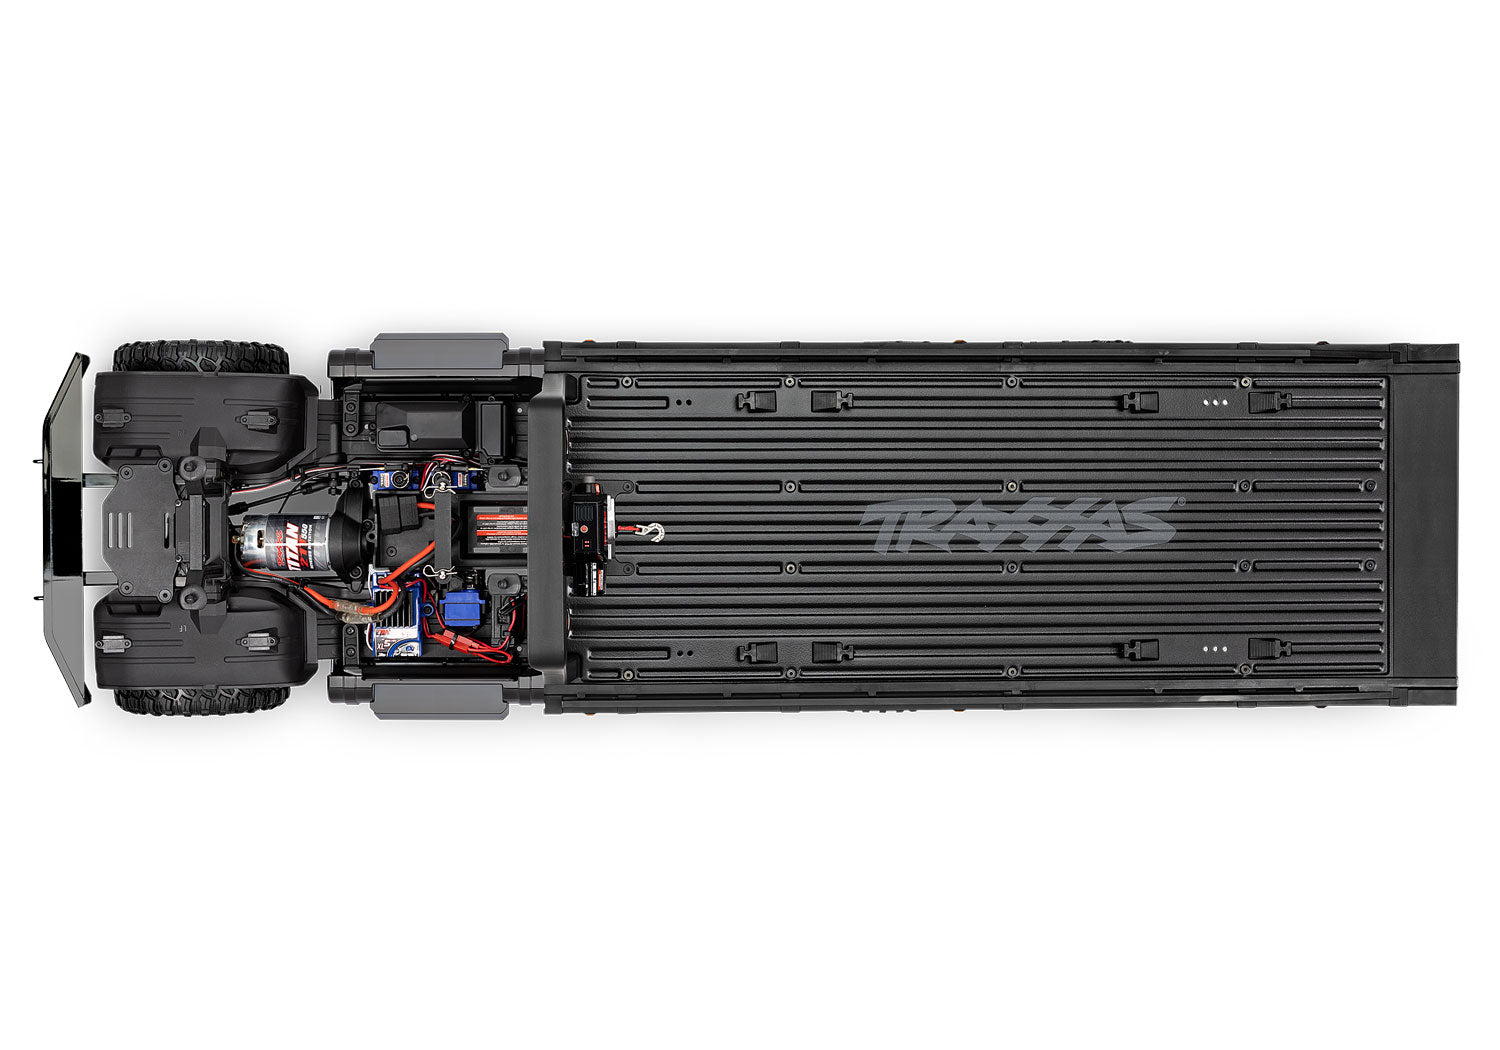 BLACK TRX-6® Ultimate RC Hauler: 6X6 Electric Flatbed Truck with TQi™ Traxxas Link™ Enabled 2.4GHz Radio System